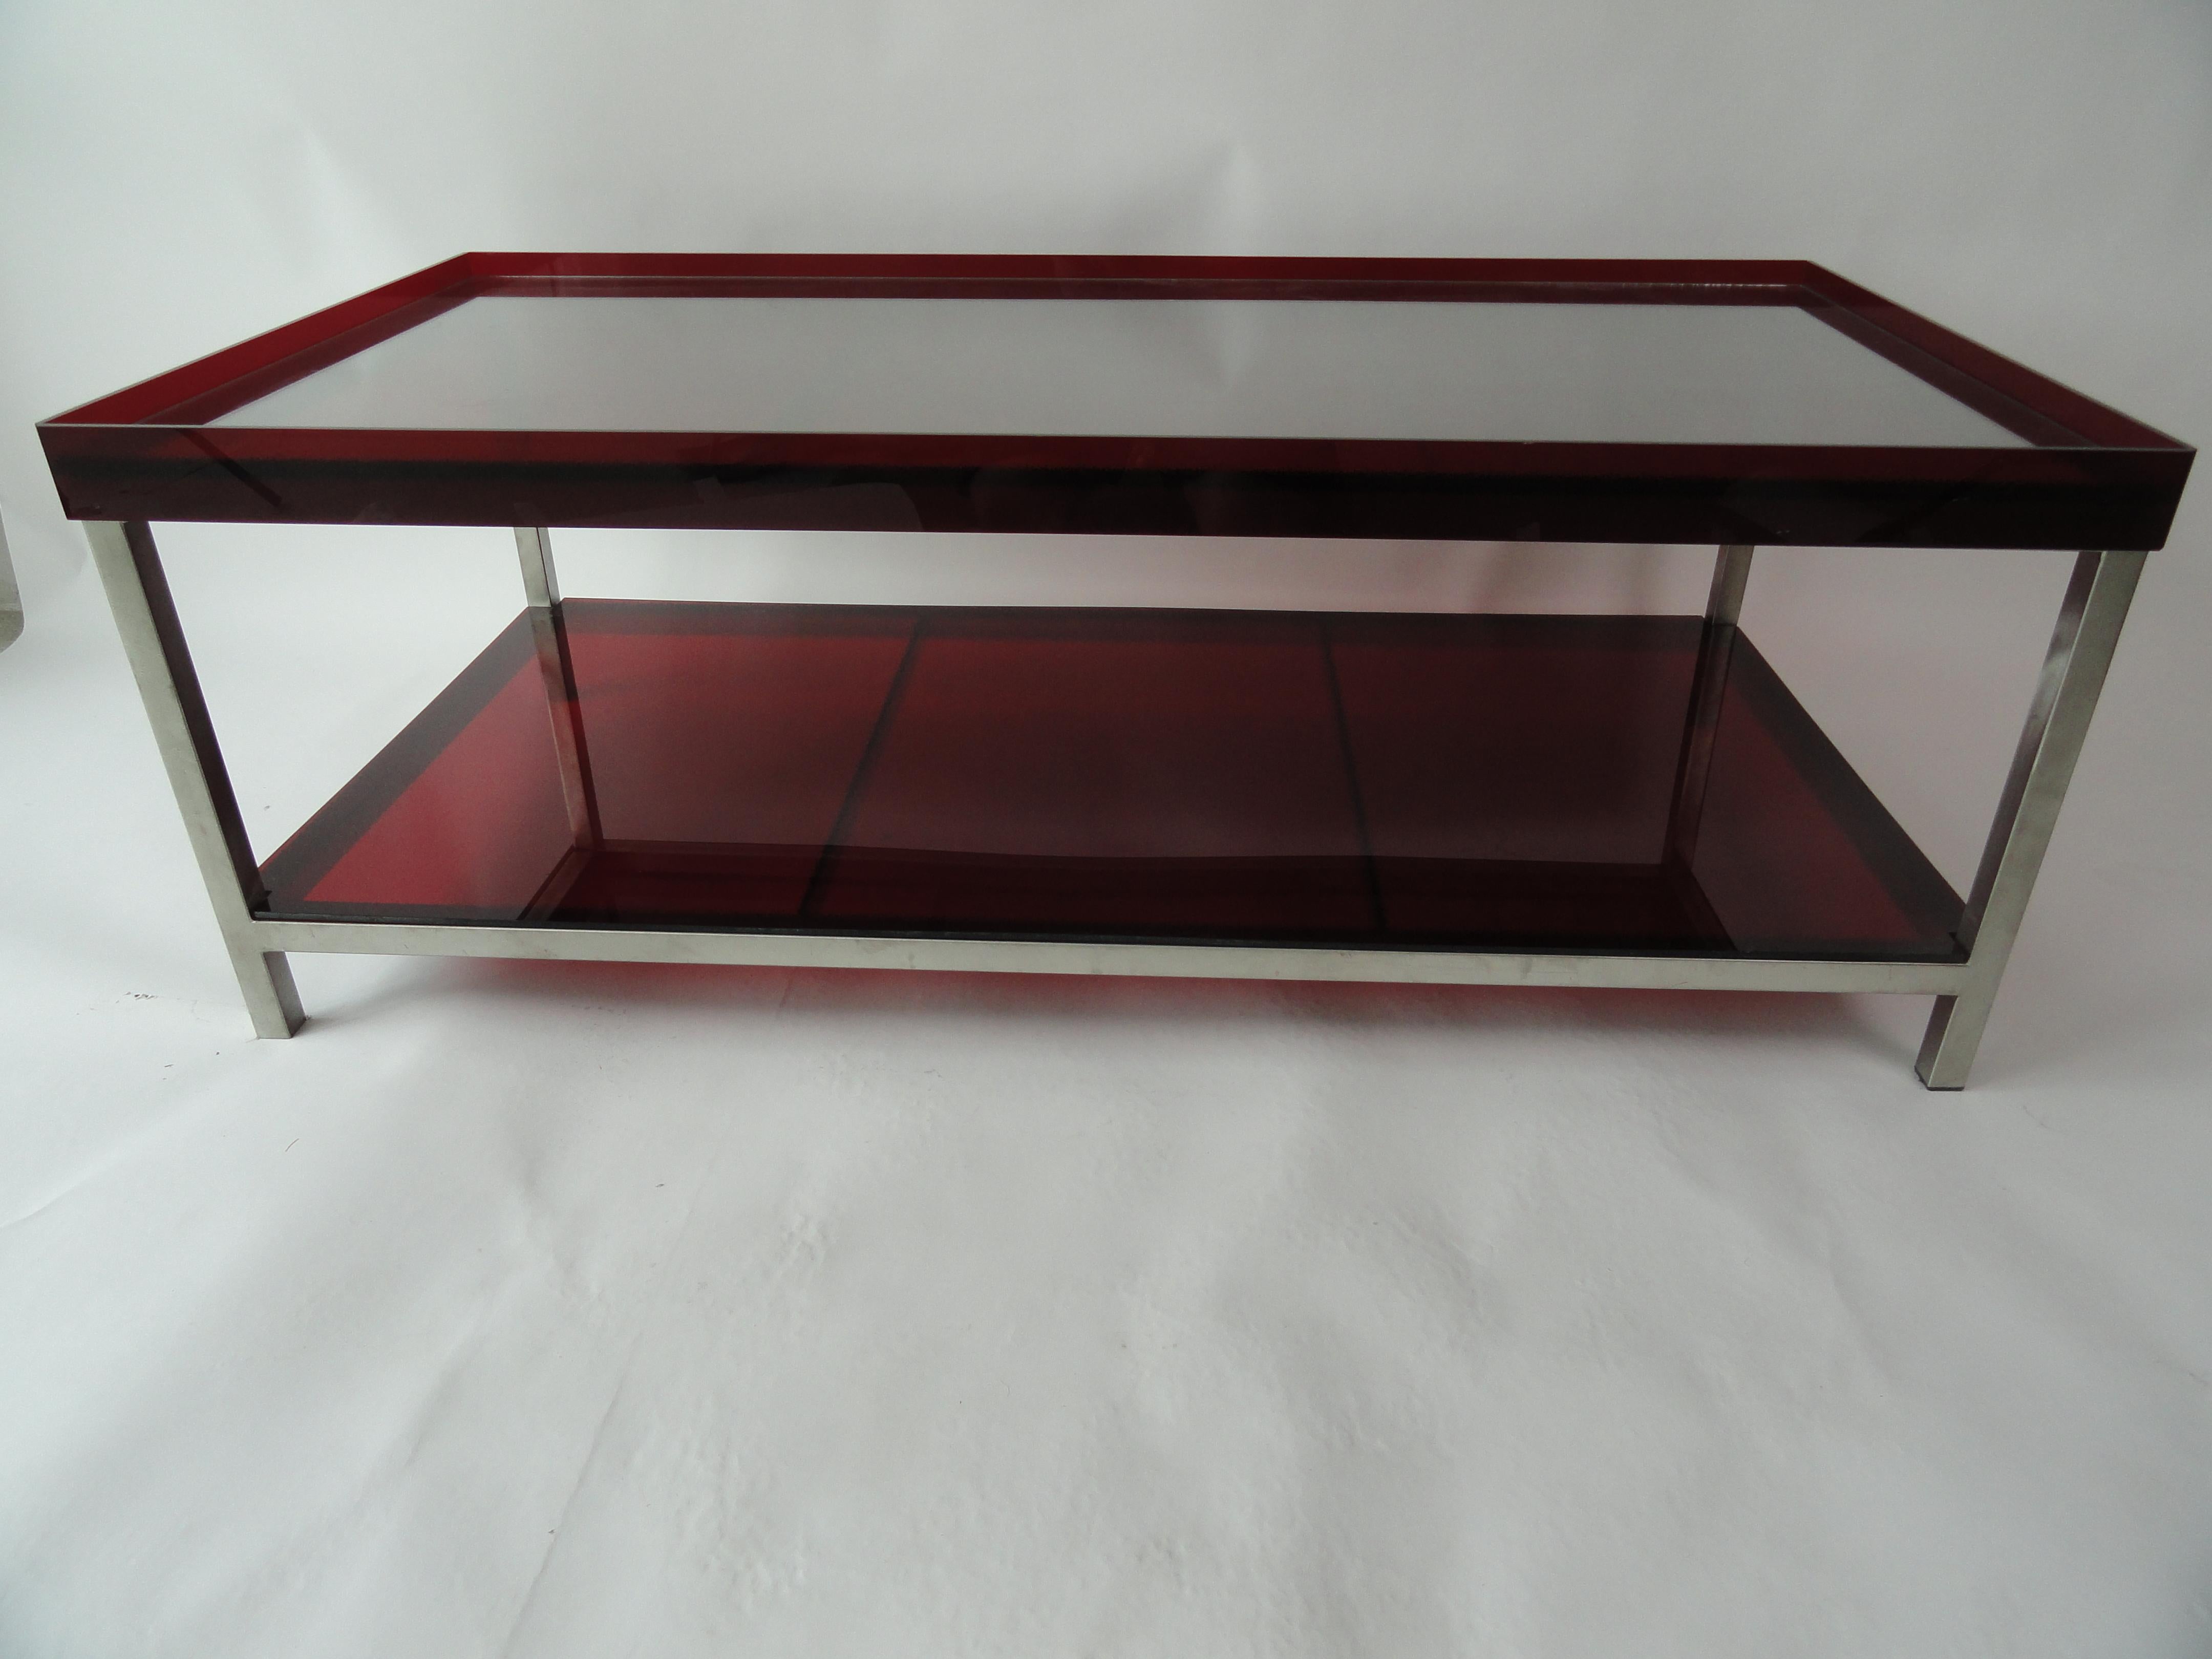 Modern brushed steel coffee table with red acrylic tray top and red acrylic lower shelf. Top has a glass insert to protect the acrylic top from scratching.